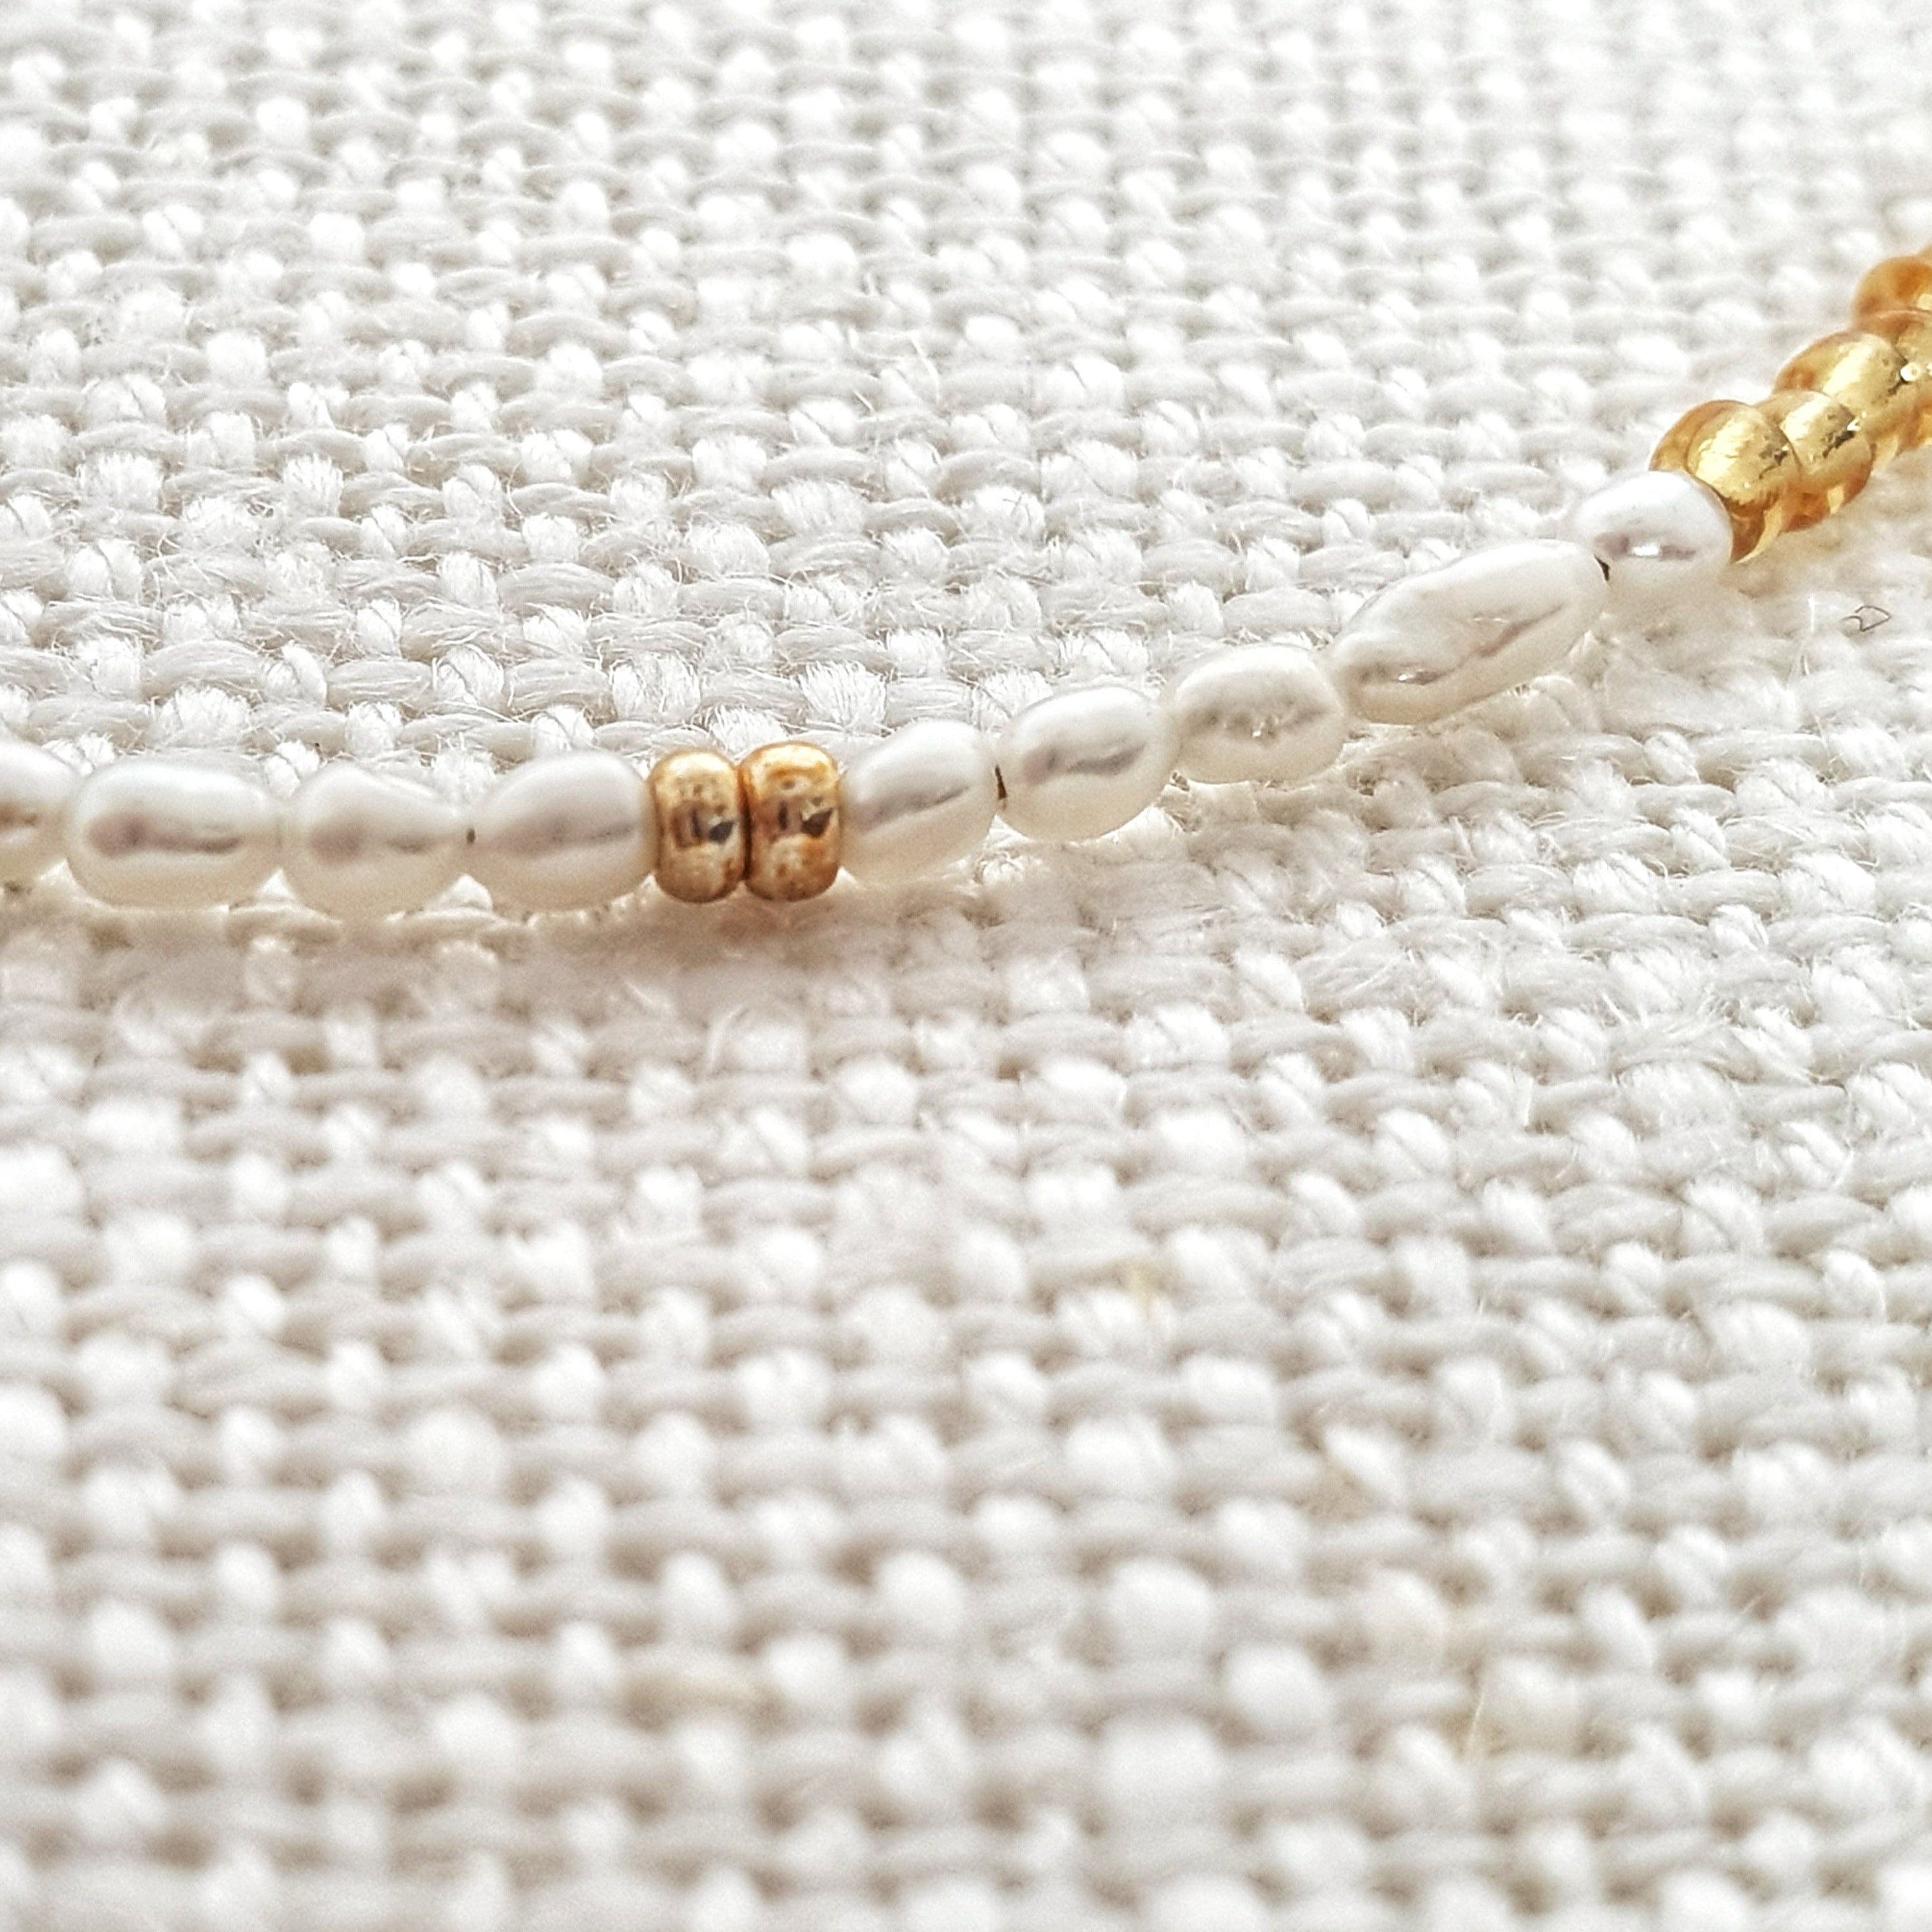 Designed with freshwater rice pearls, glass seed beads and 14Kt gold-filled beads. A dainty yet luxe piece featuring tiny pearls adorned by accents of gold. Stack this together with another minimal design for a delicate, feminine feel.